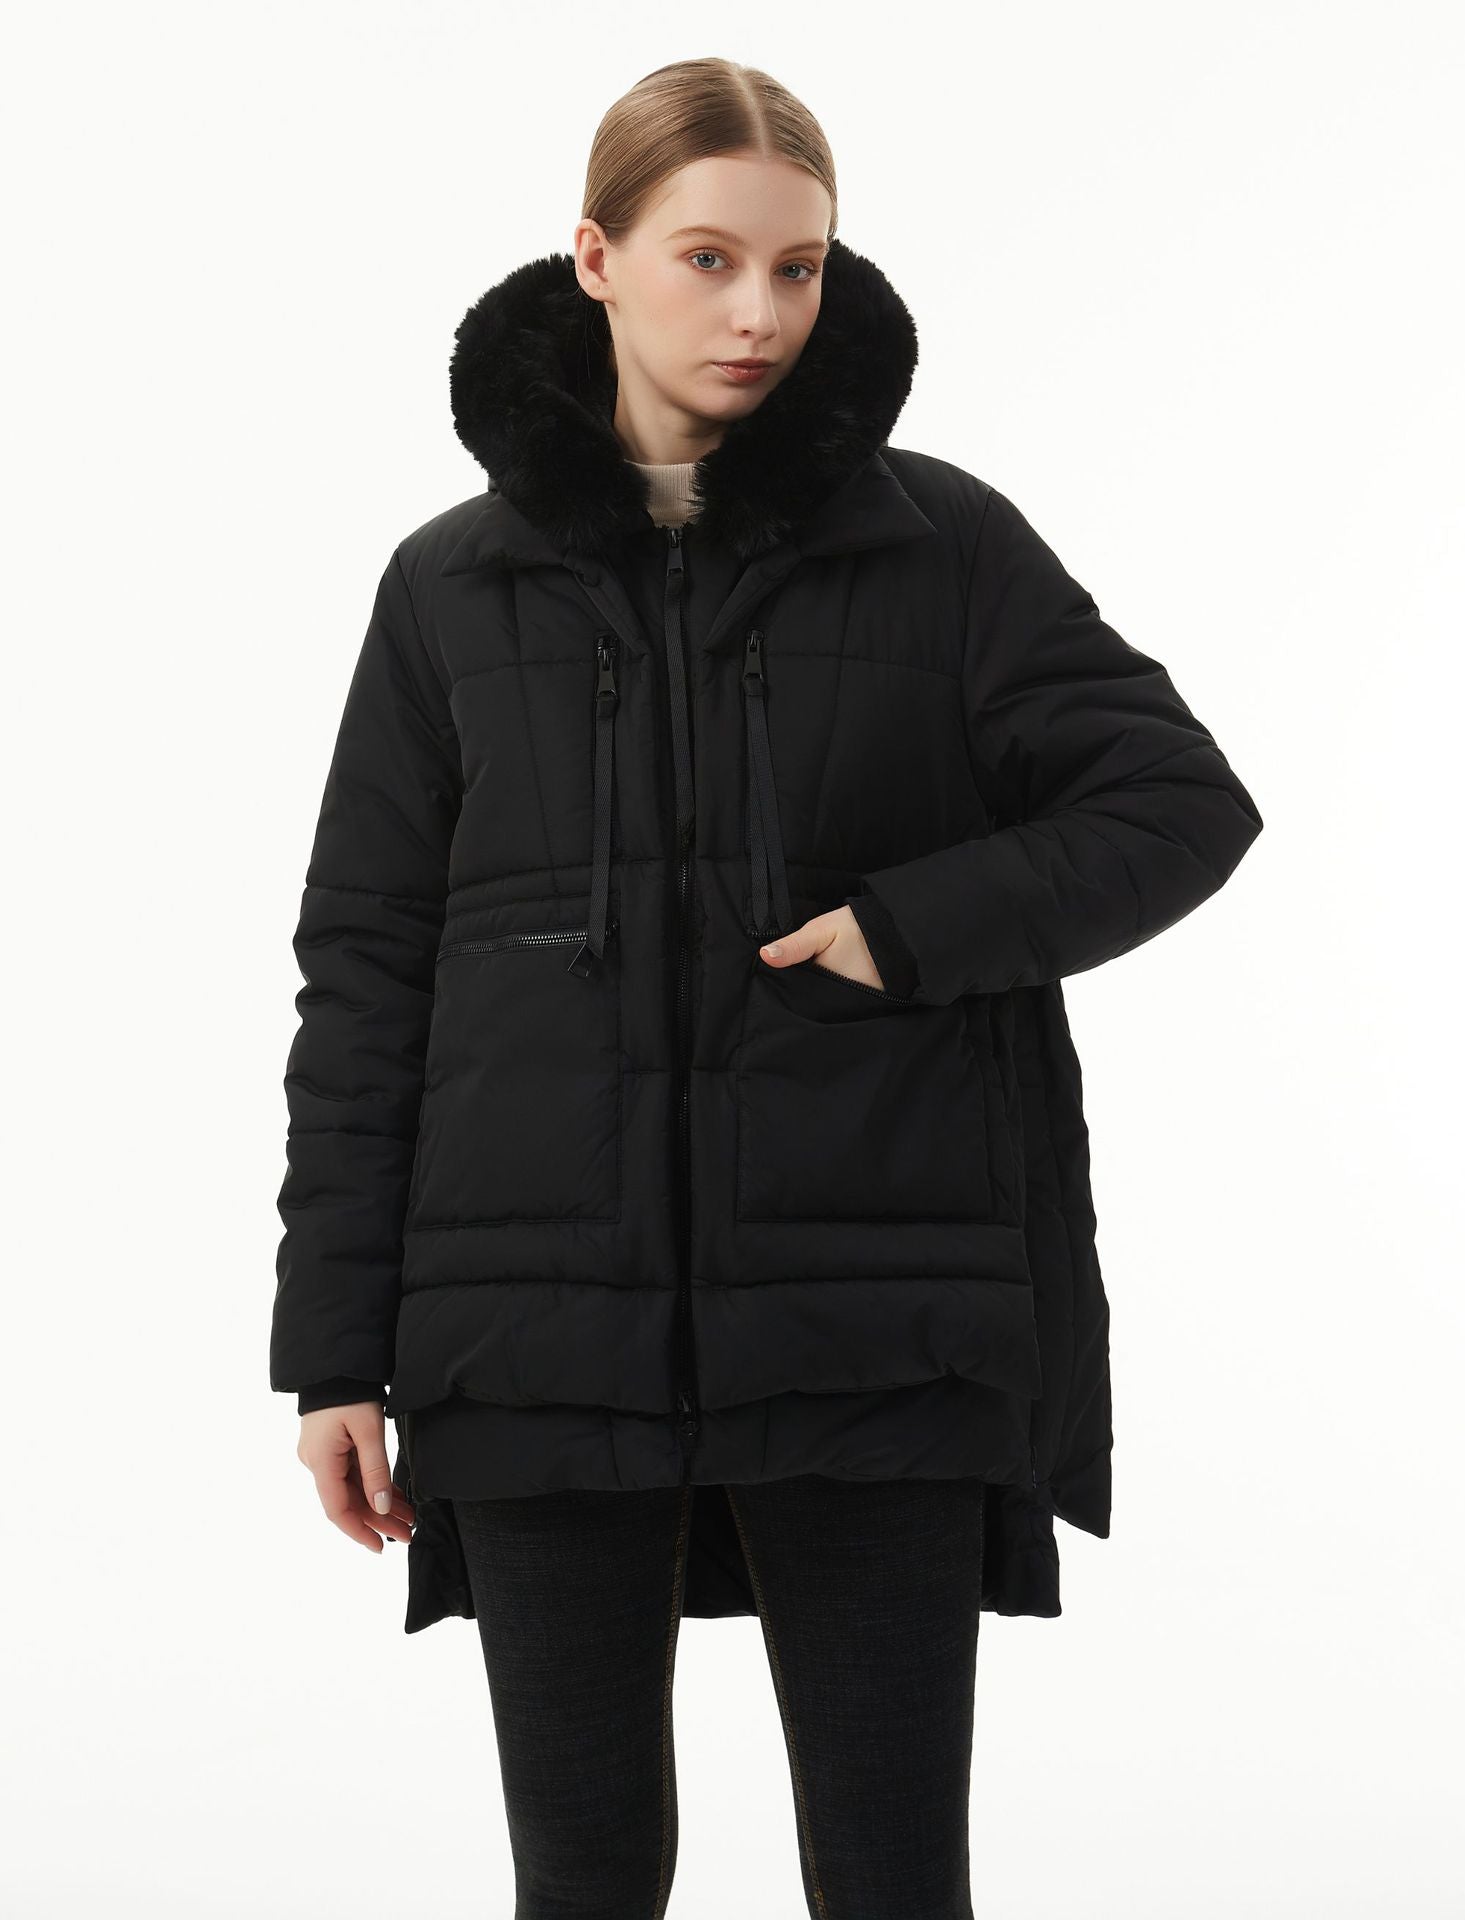 jackets  | Women's Casual Hooded Middle Long Cotton-padded Coat | Black |  L| thecurvestory.myshopify.com